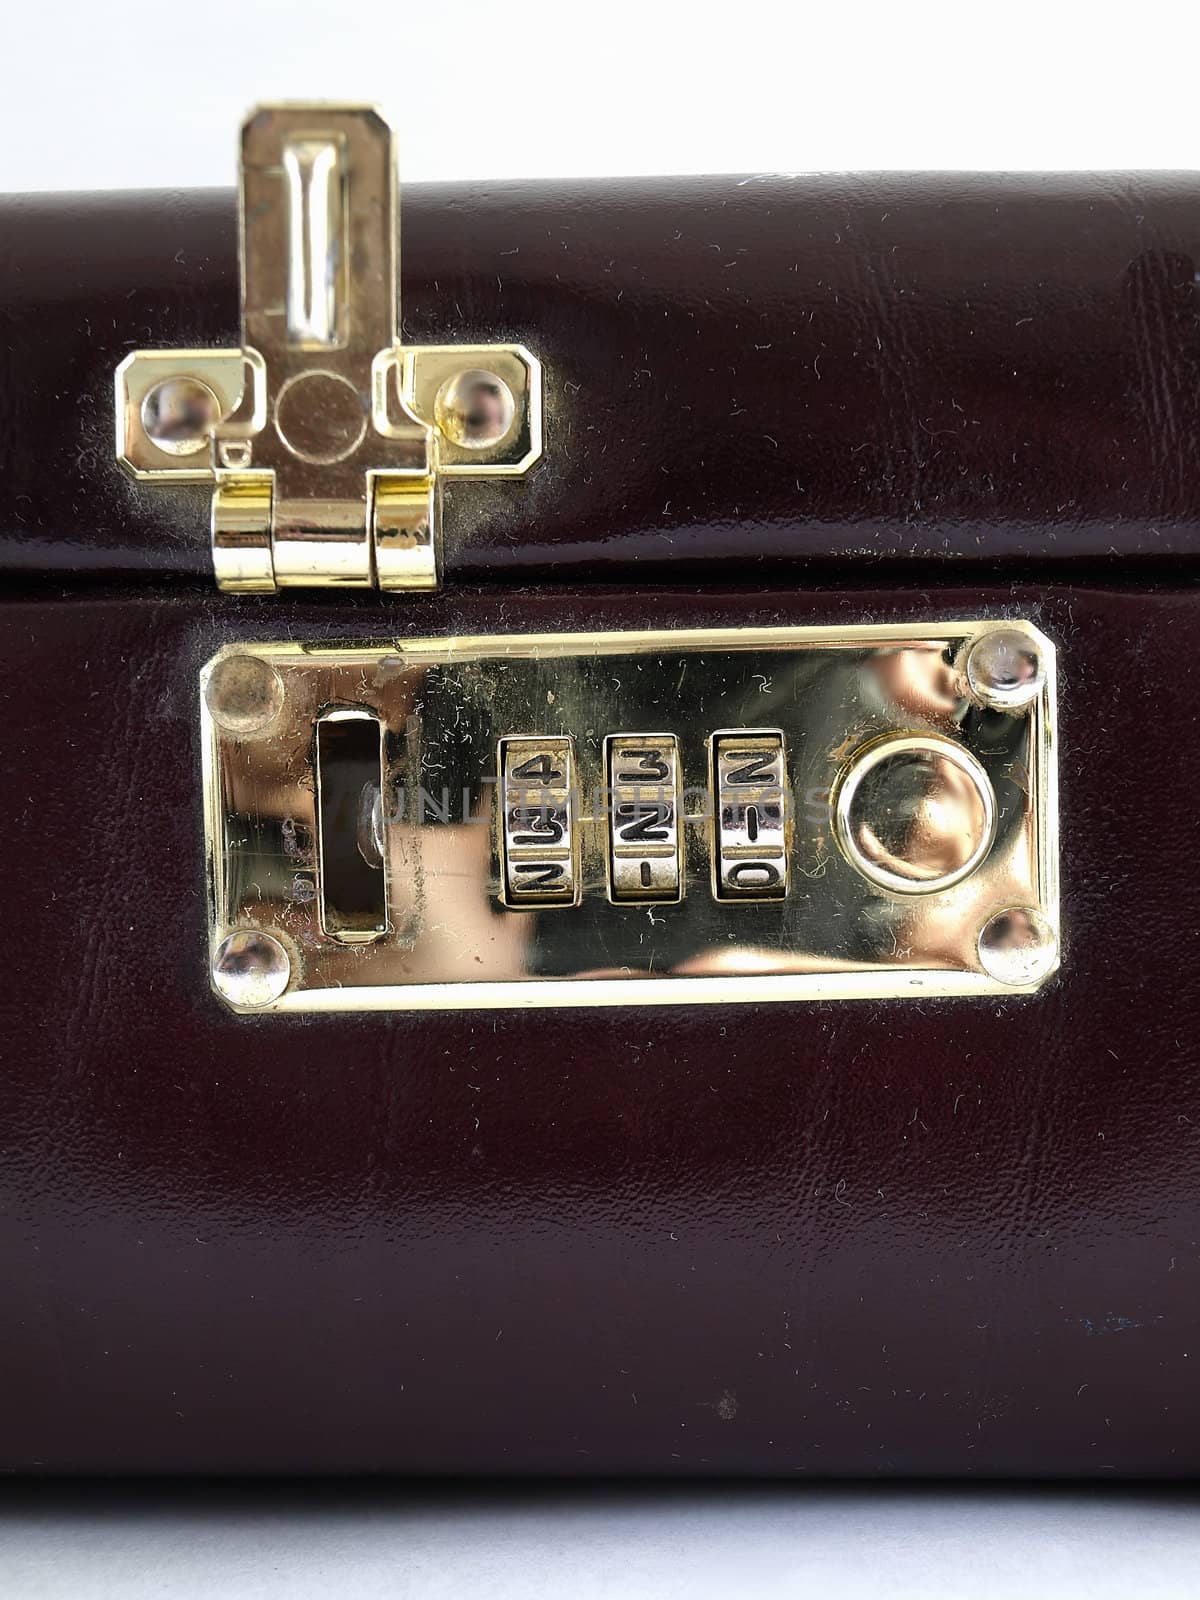 Isolated view of a combination lock in an open position